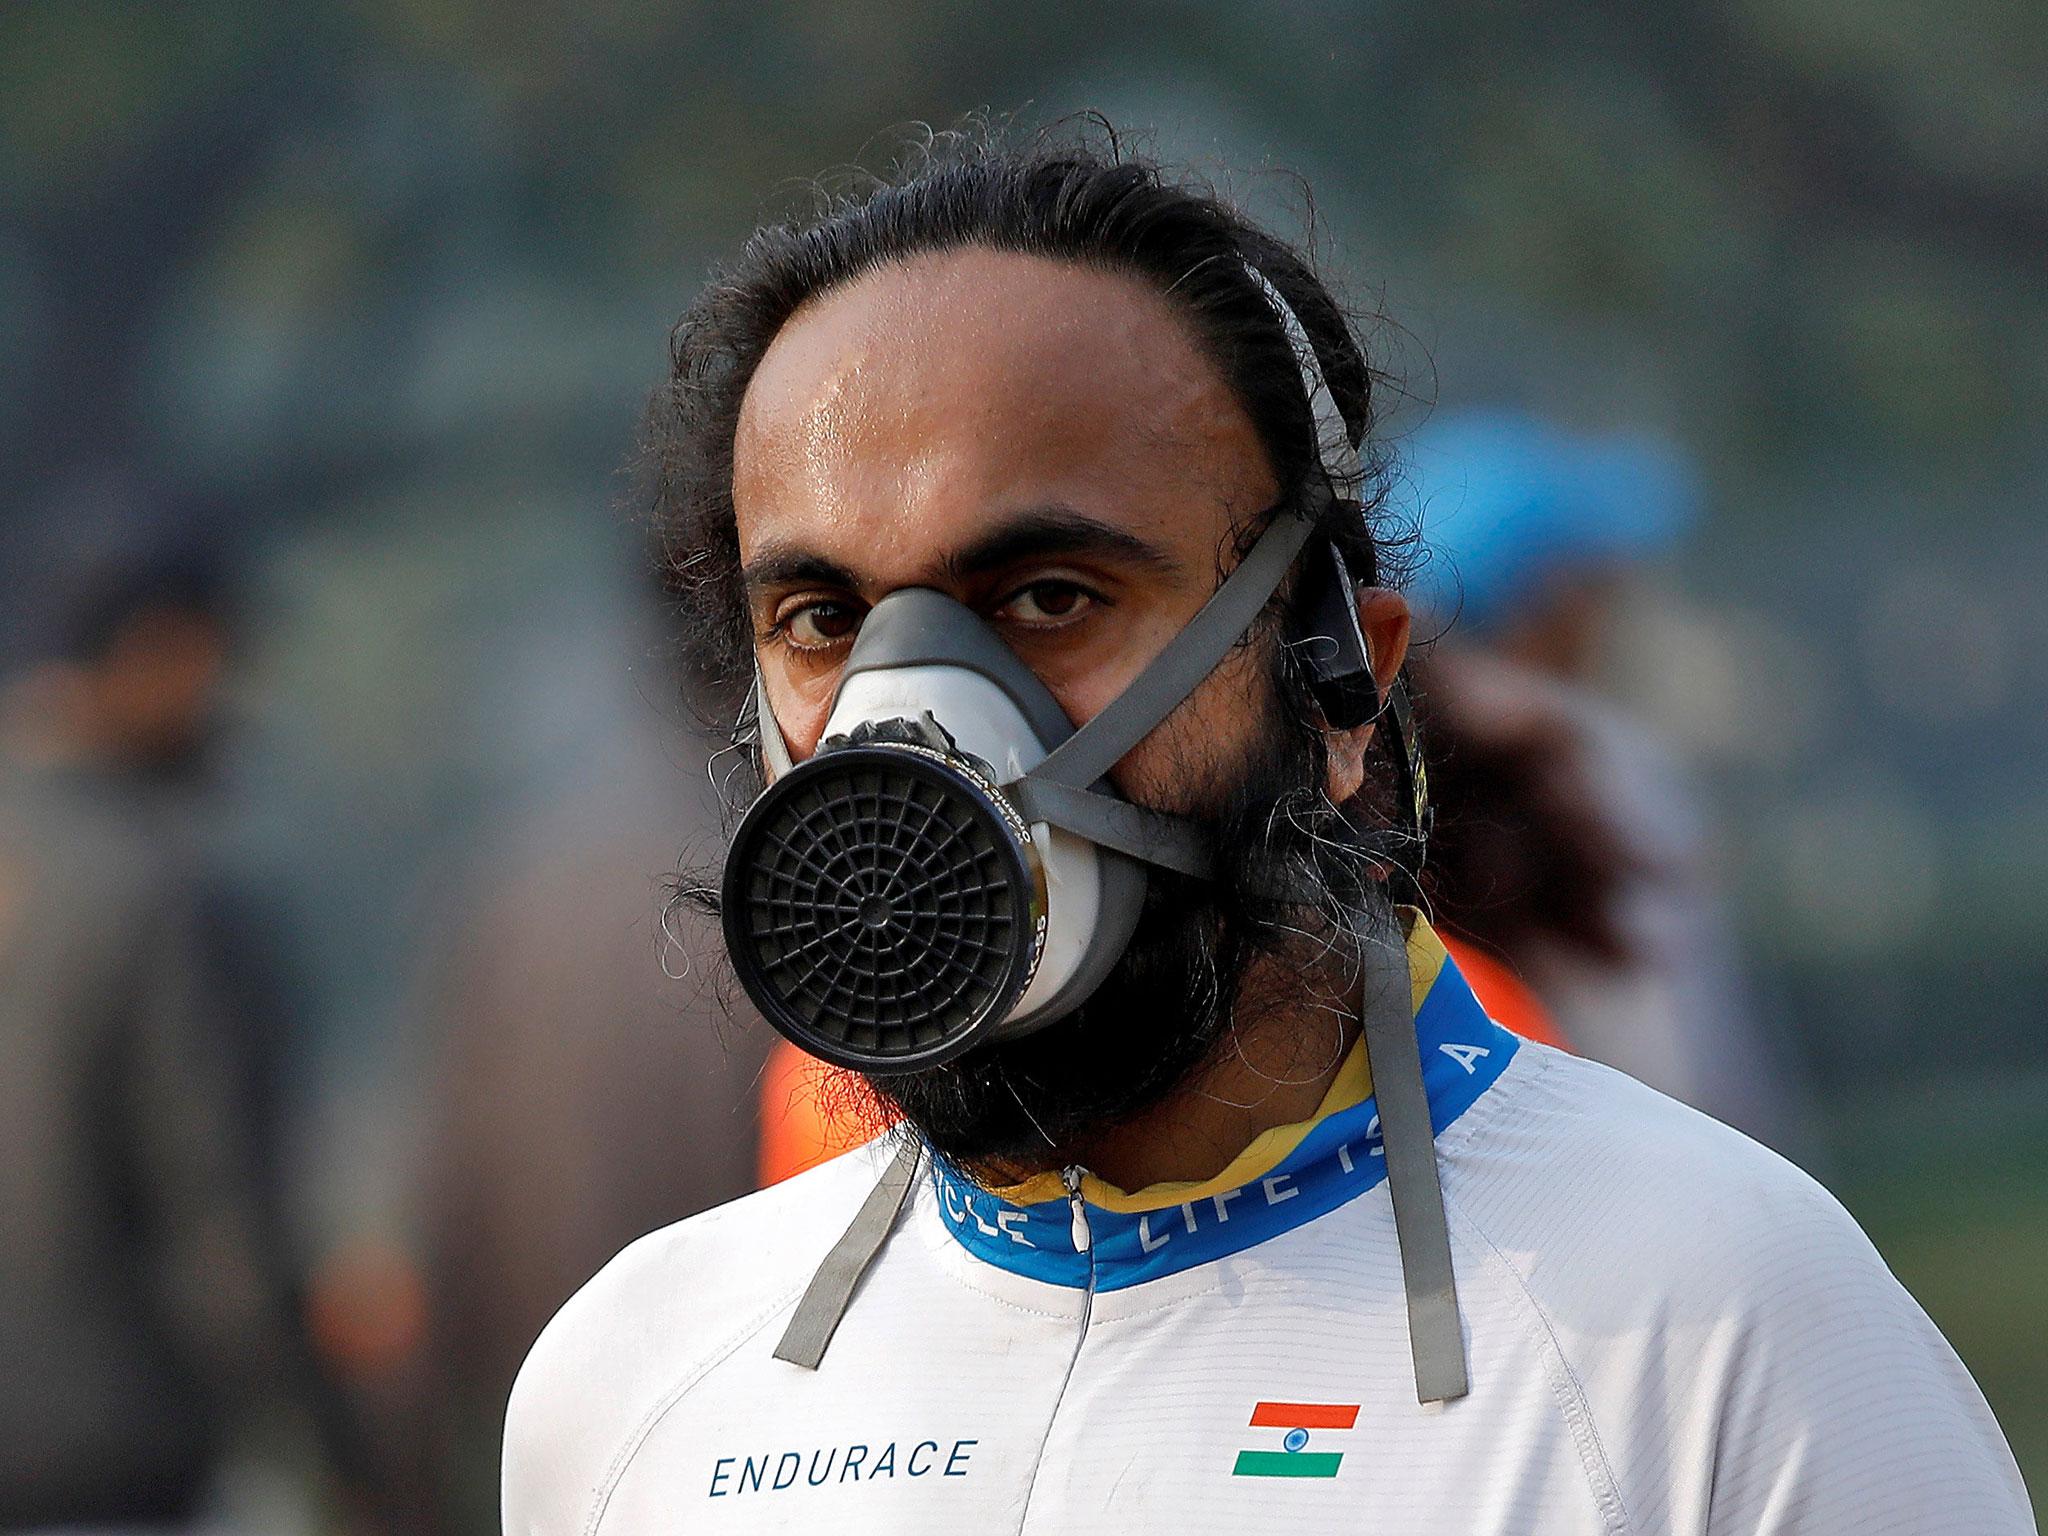 &#13;
A runner wearing a face mask takes part in marathon &#13;